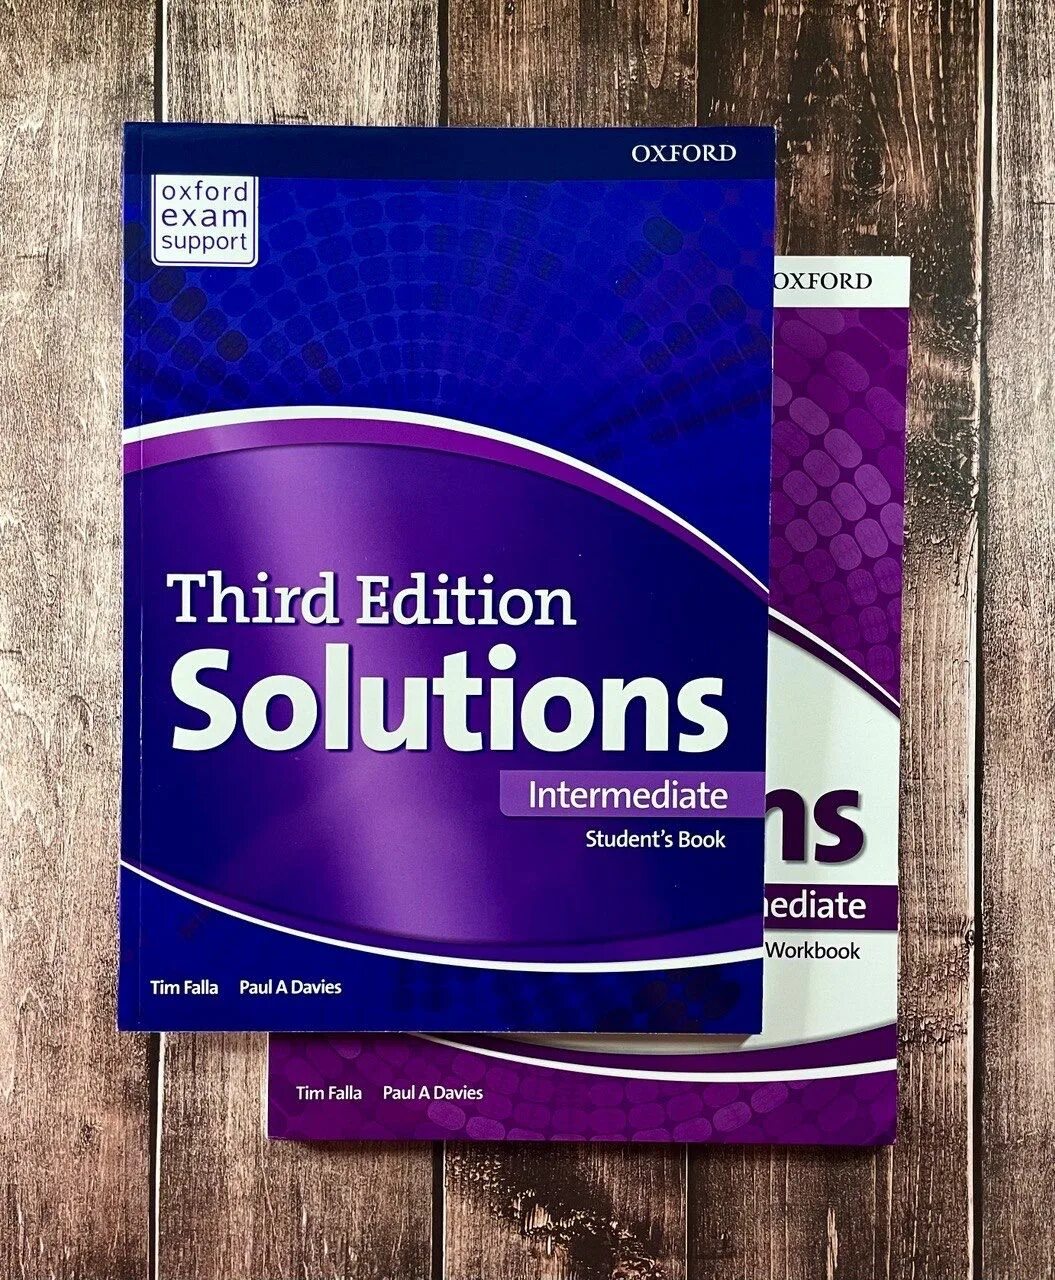 Solution intermediate answers. Solutions pre-Intermediate 3rd Edition. Intermediate solutions Intermediate. Solutions Intermediate 3rd Edition. Third Edition solutions Intermediate Workbook.